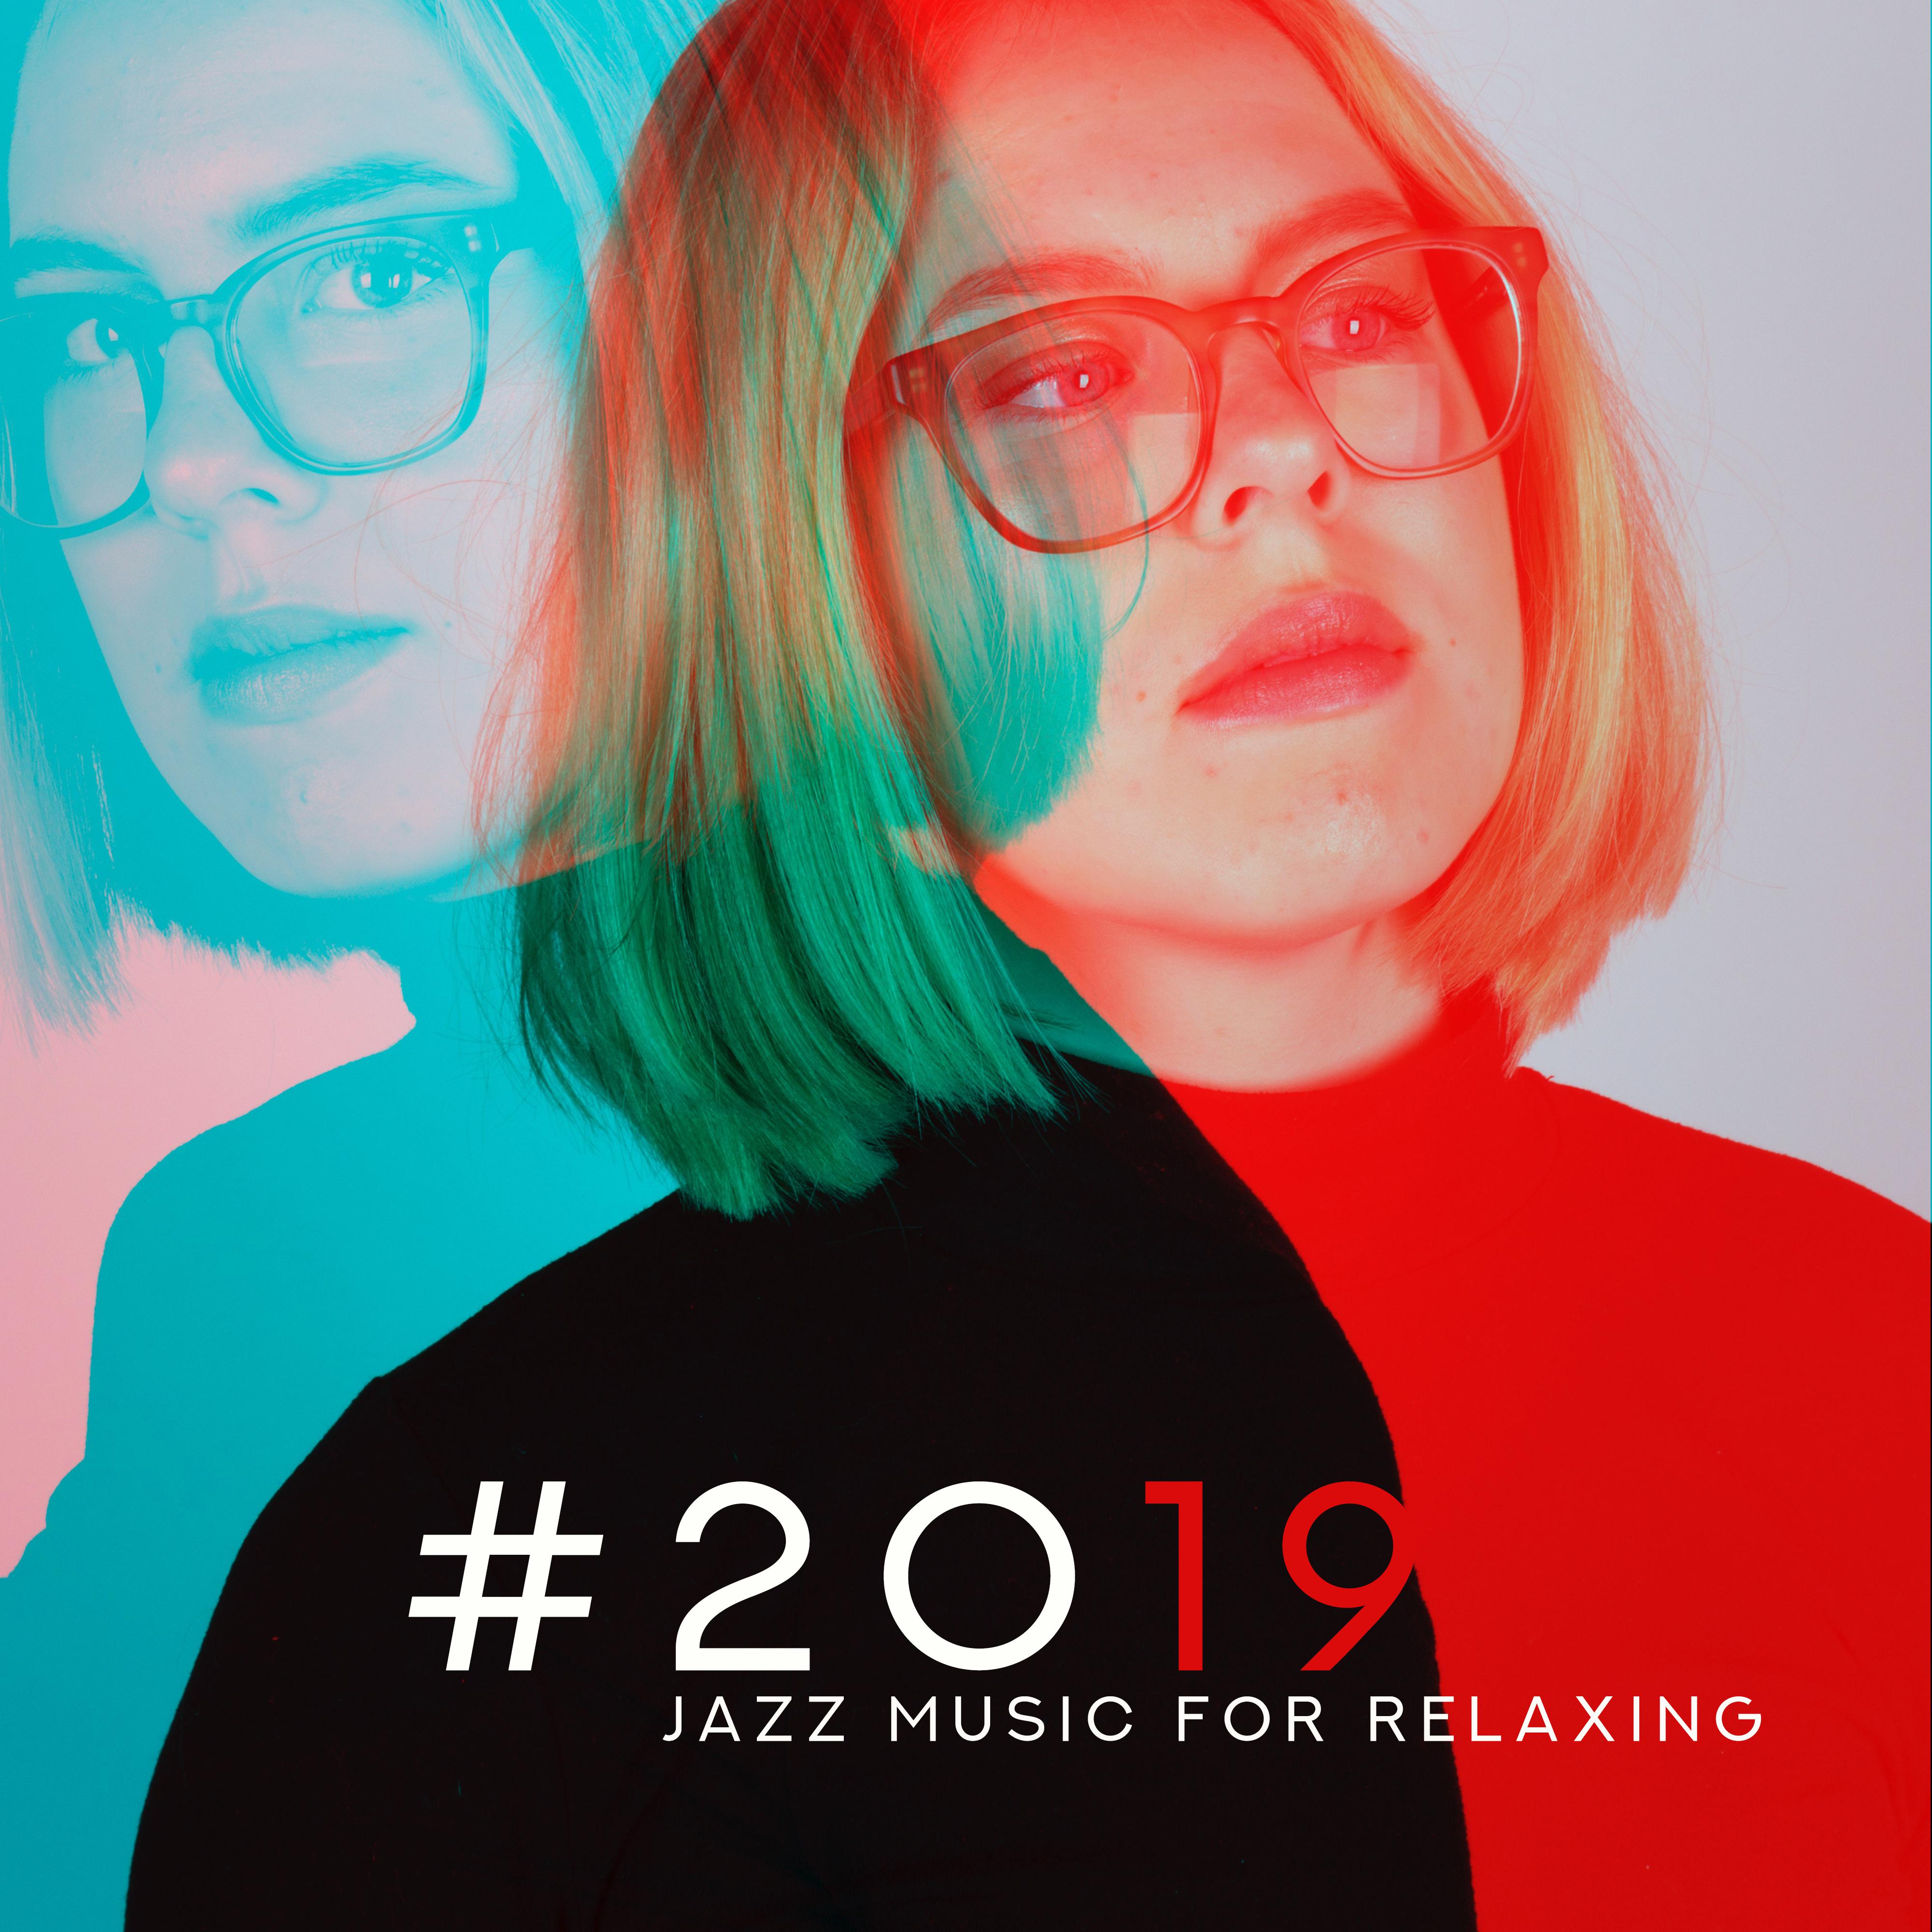 #2019 Jazz Music for Relaxing – Instrumental Jazz Music Ambient, Relax Zone, Jazz Lounge, Background Jazz Relaxation, Reduce Stress